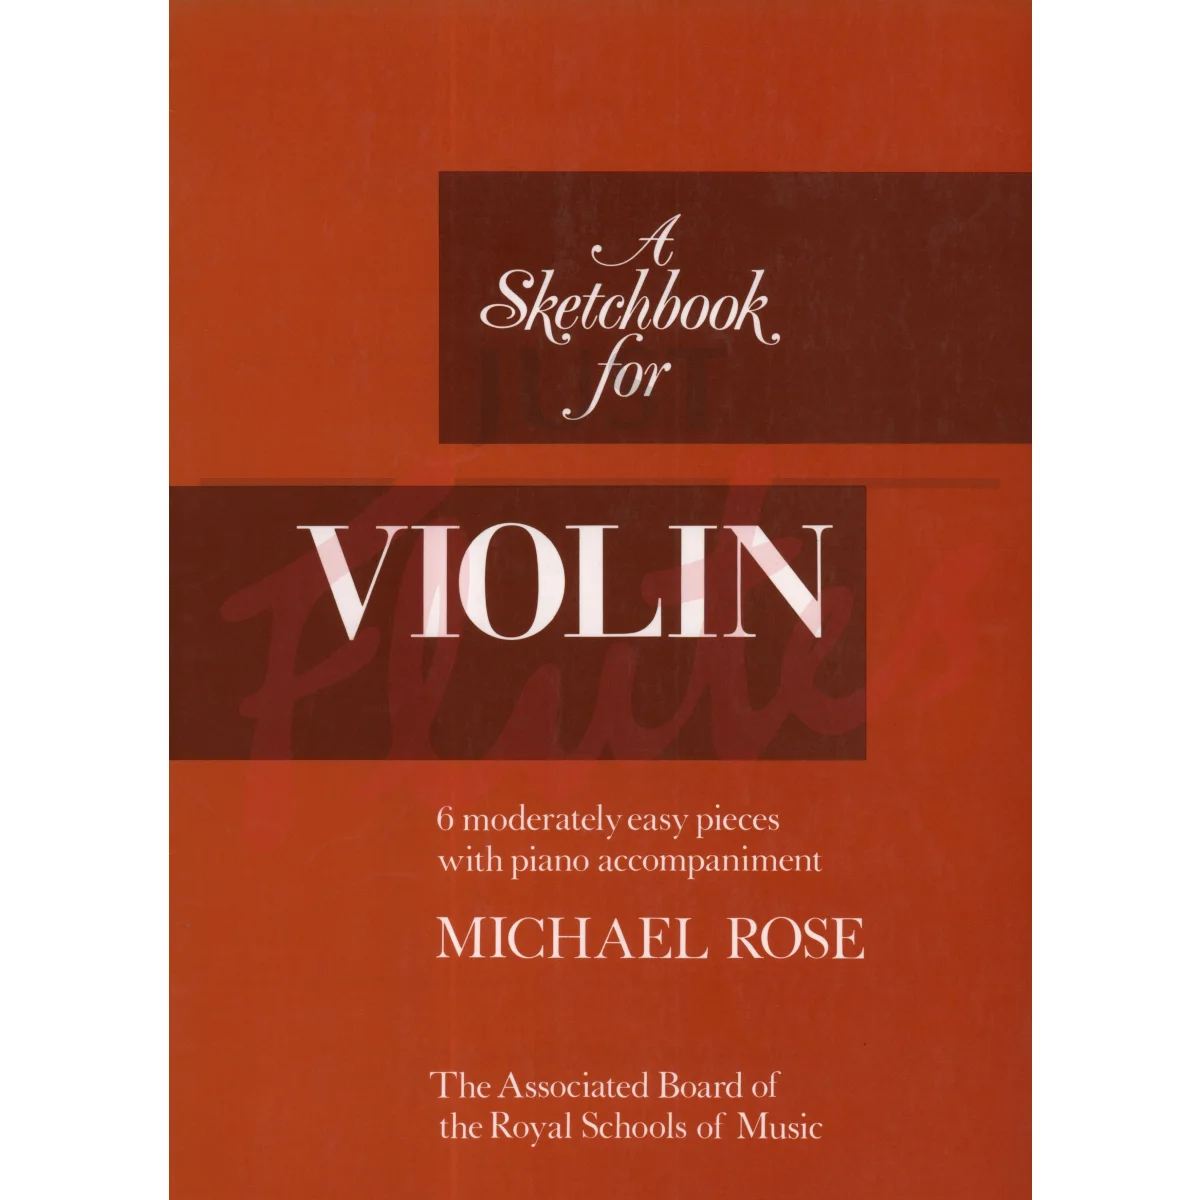 A Sketchbook for Violin and Piano